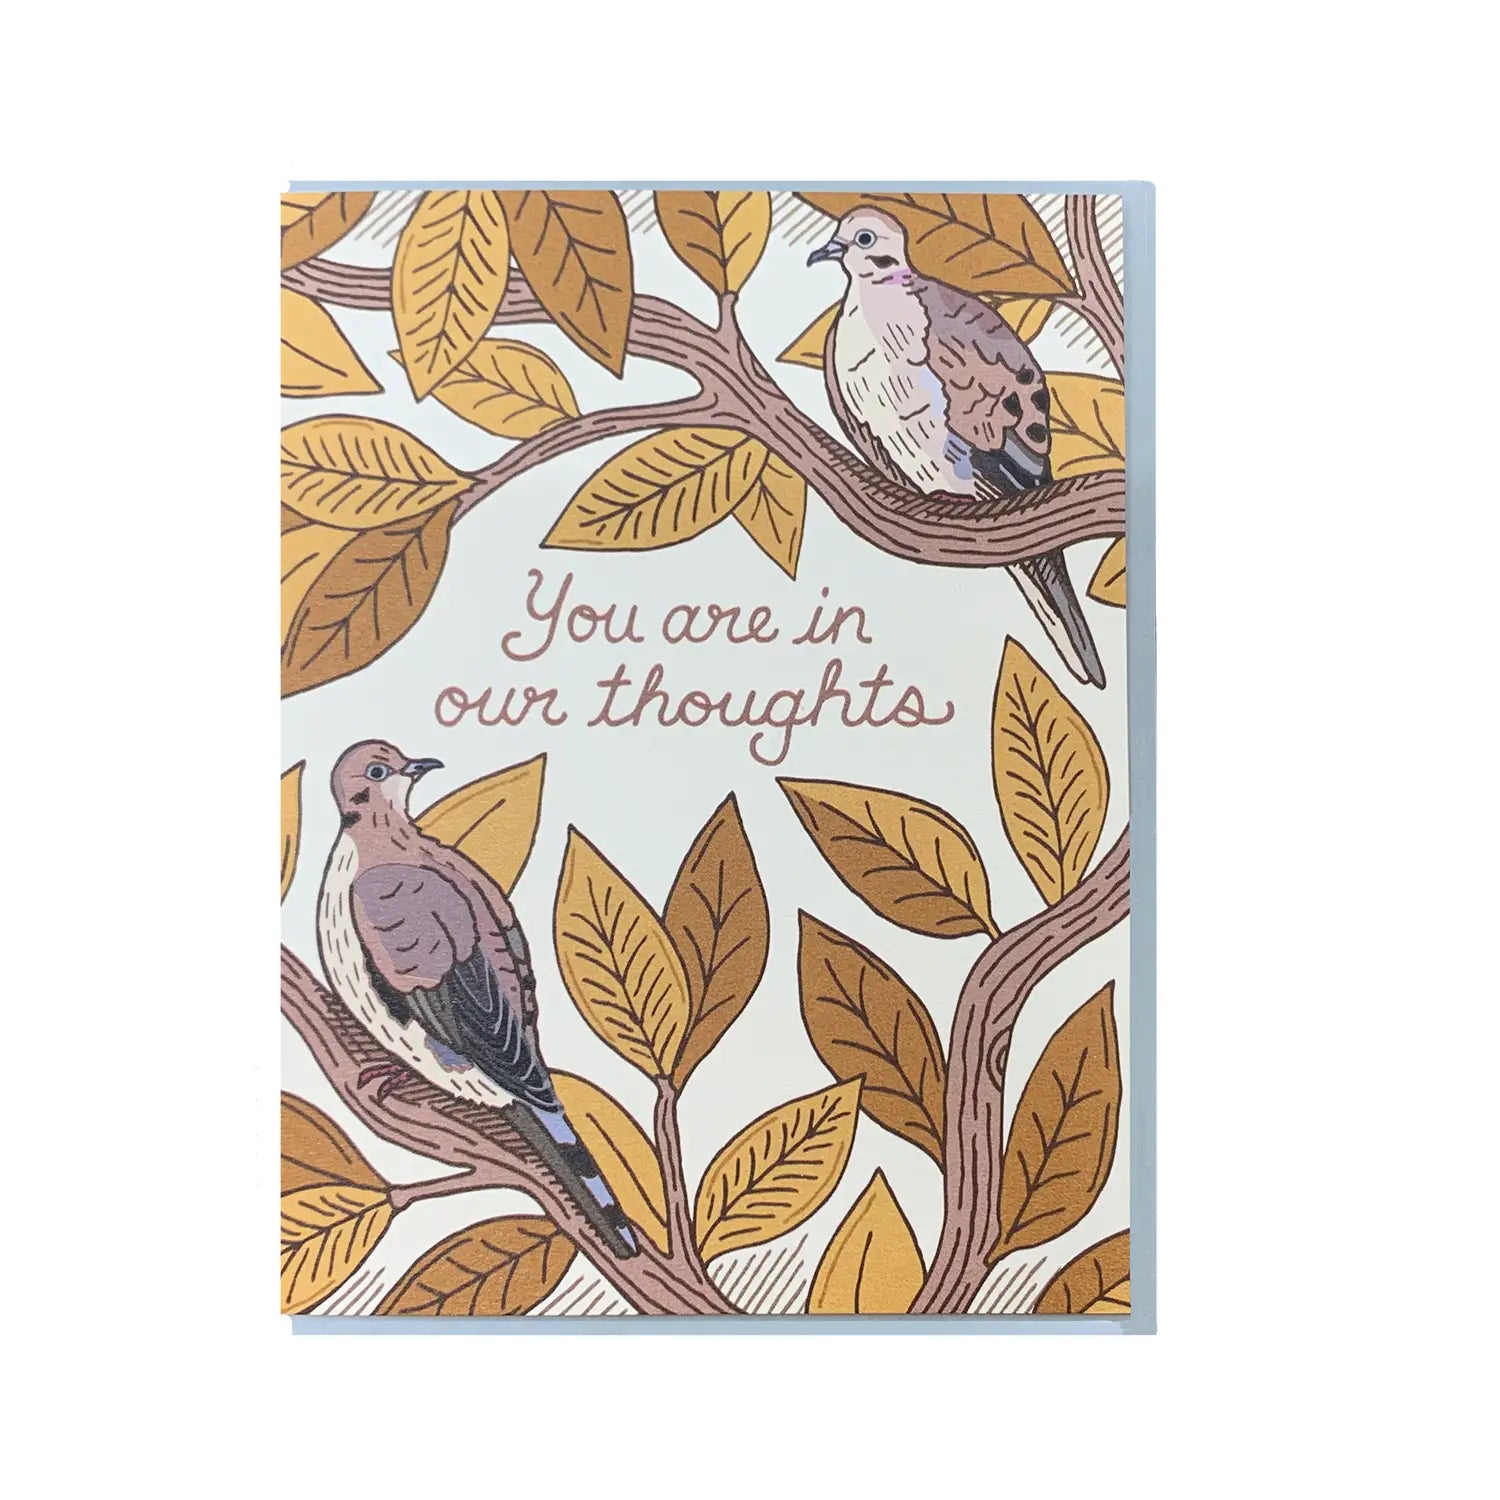 White card with cream background. Brown branches with mustard yellow leaves and two brown birds. Brown text reads "you are in our thoughts" 